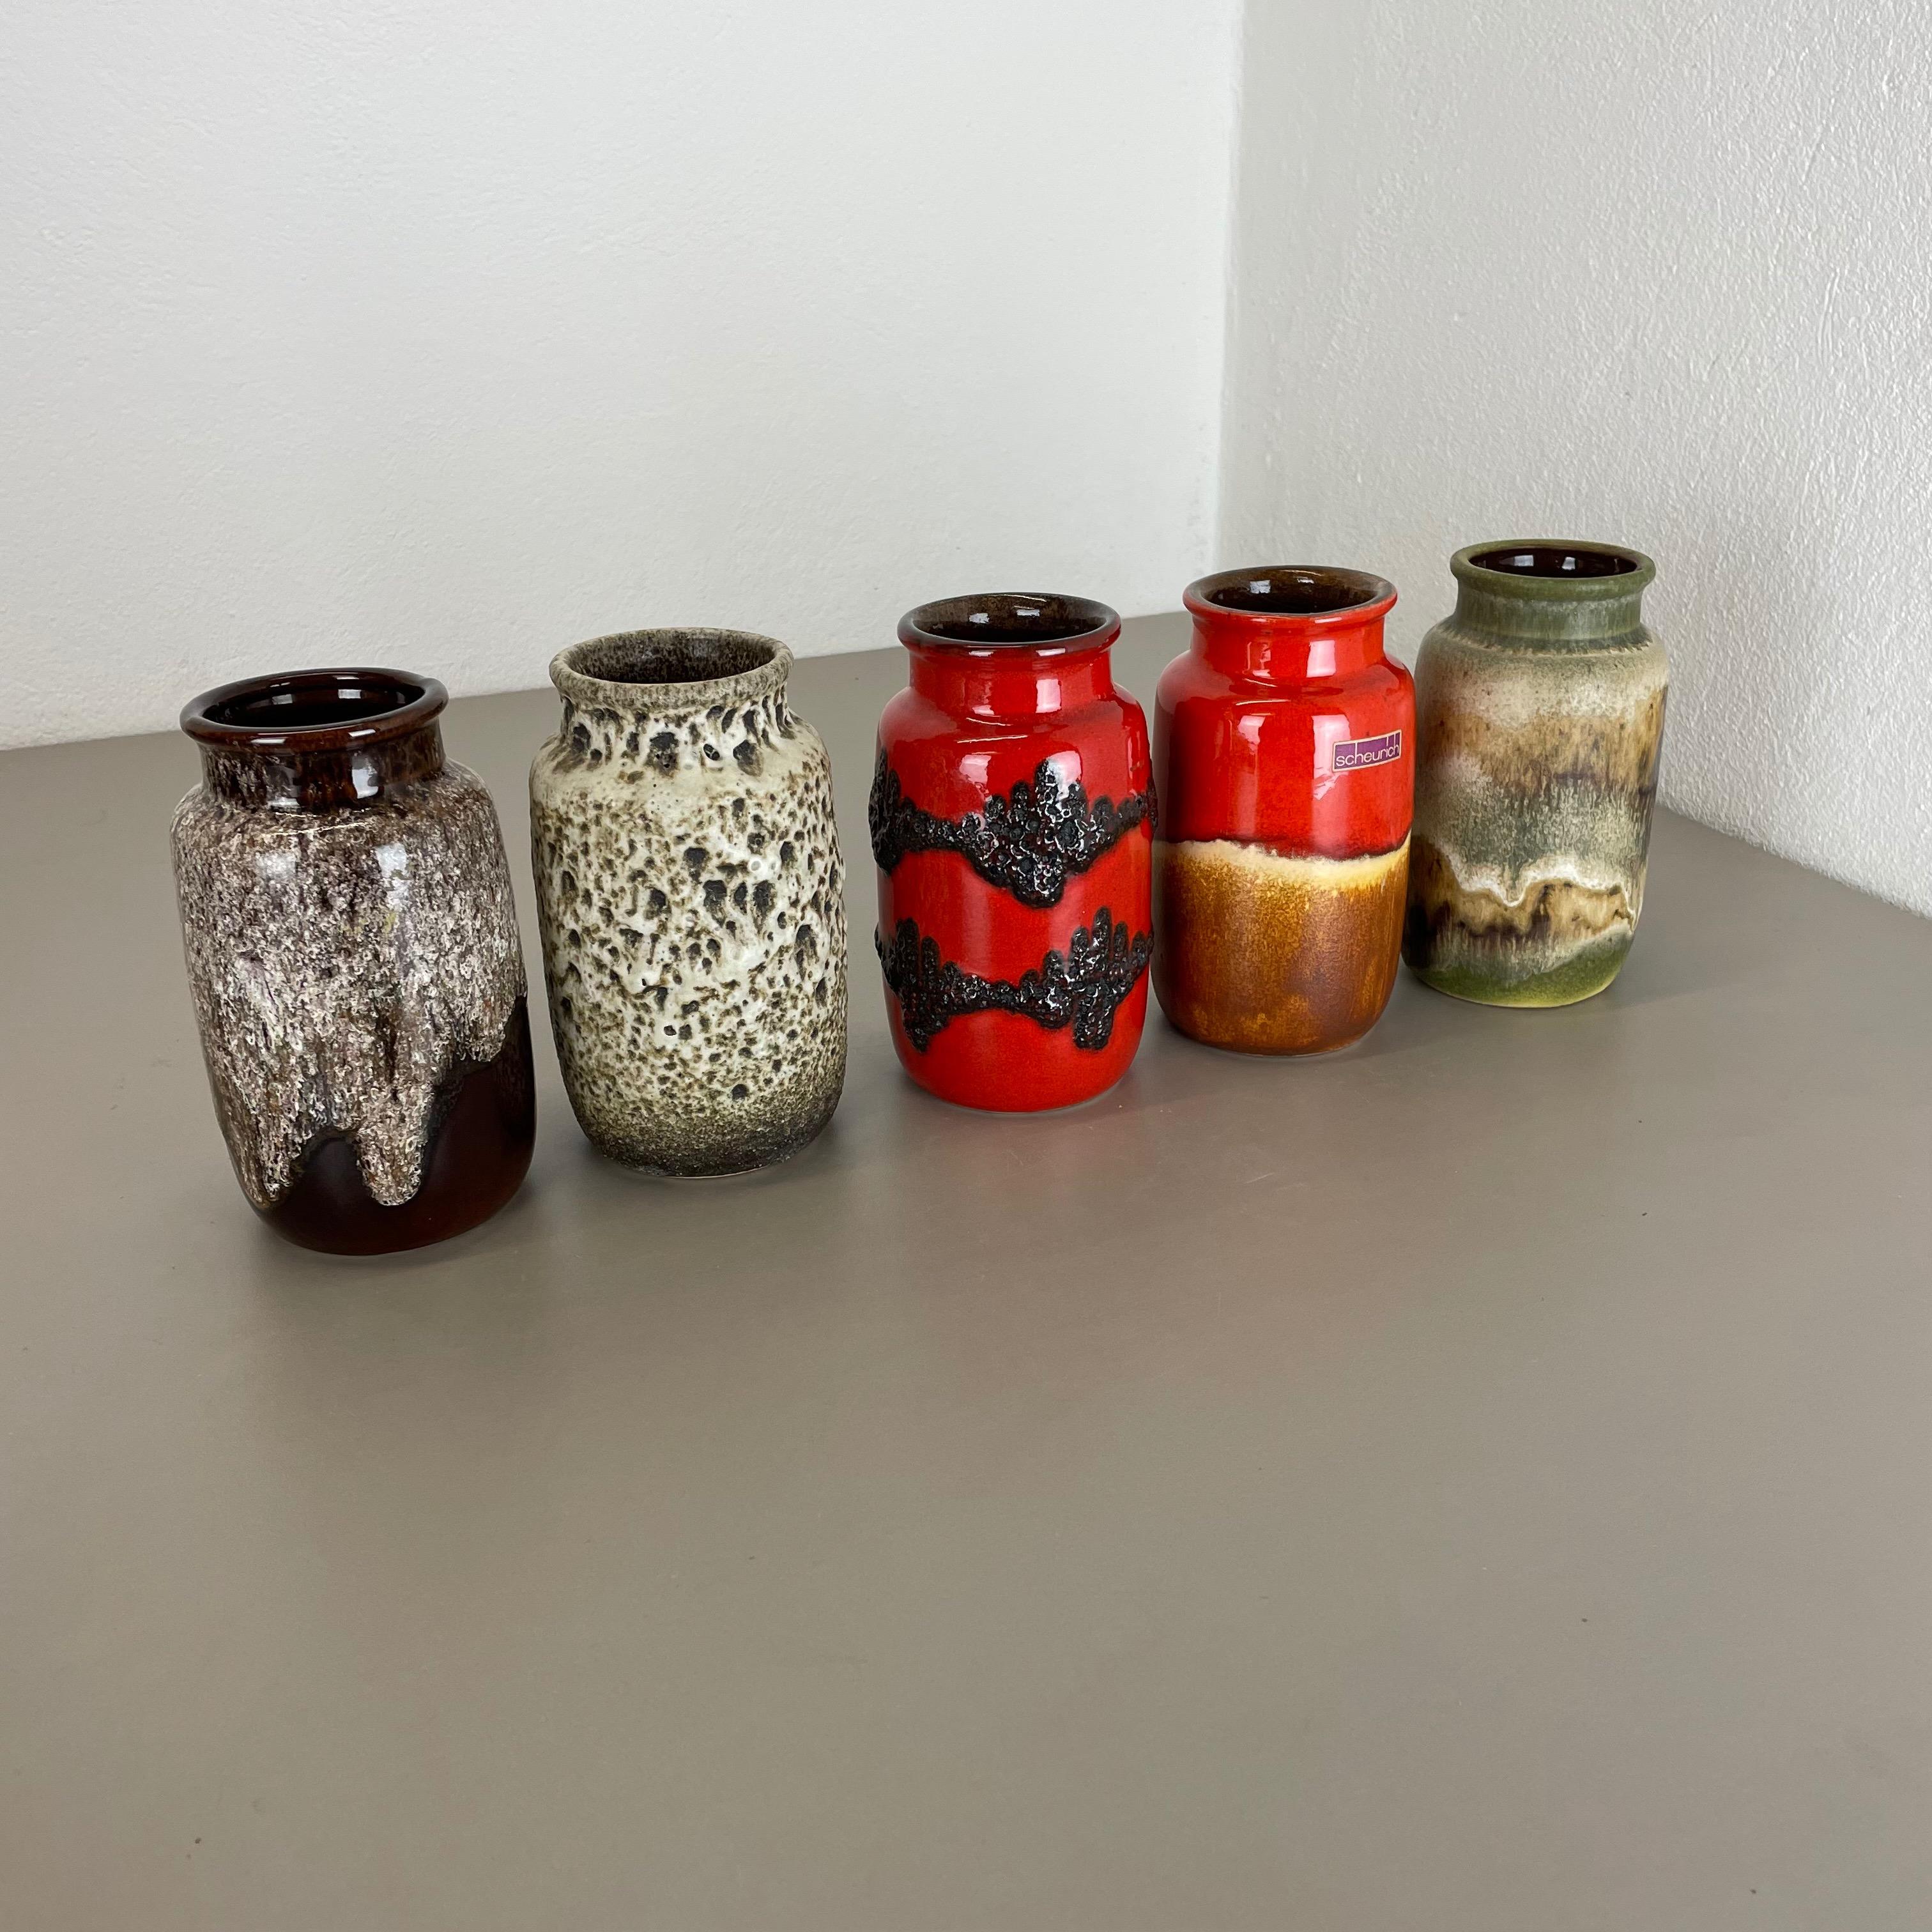 Article:

Set of five fat lava art vases

Producer:

Scheurich, Germany

Decade:

1970s

These original vintage vases was produced in the 1970s in Germany. It is made of ceramic pottery in fat lava optic. Super rare in this coloration.